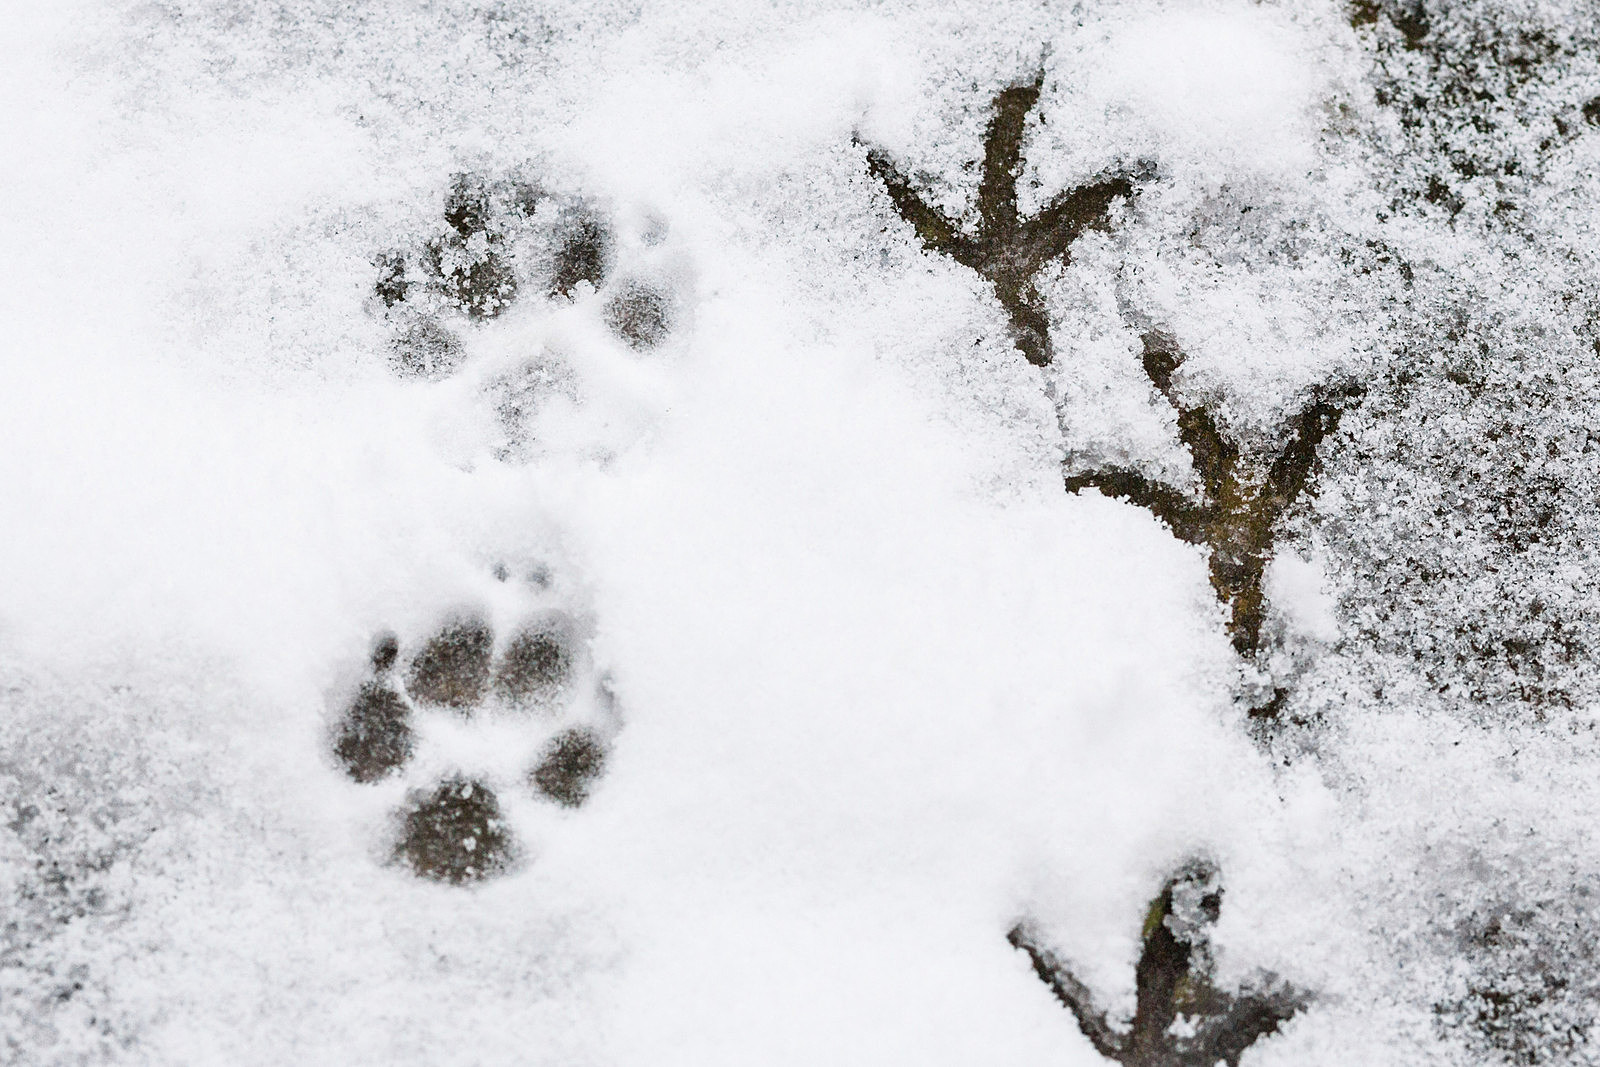 A dog and large bird footprints in the snow